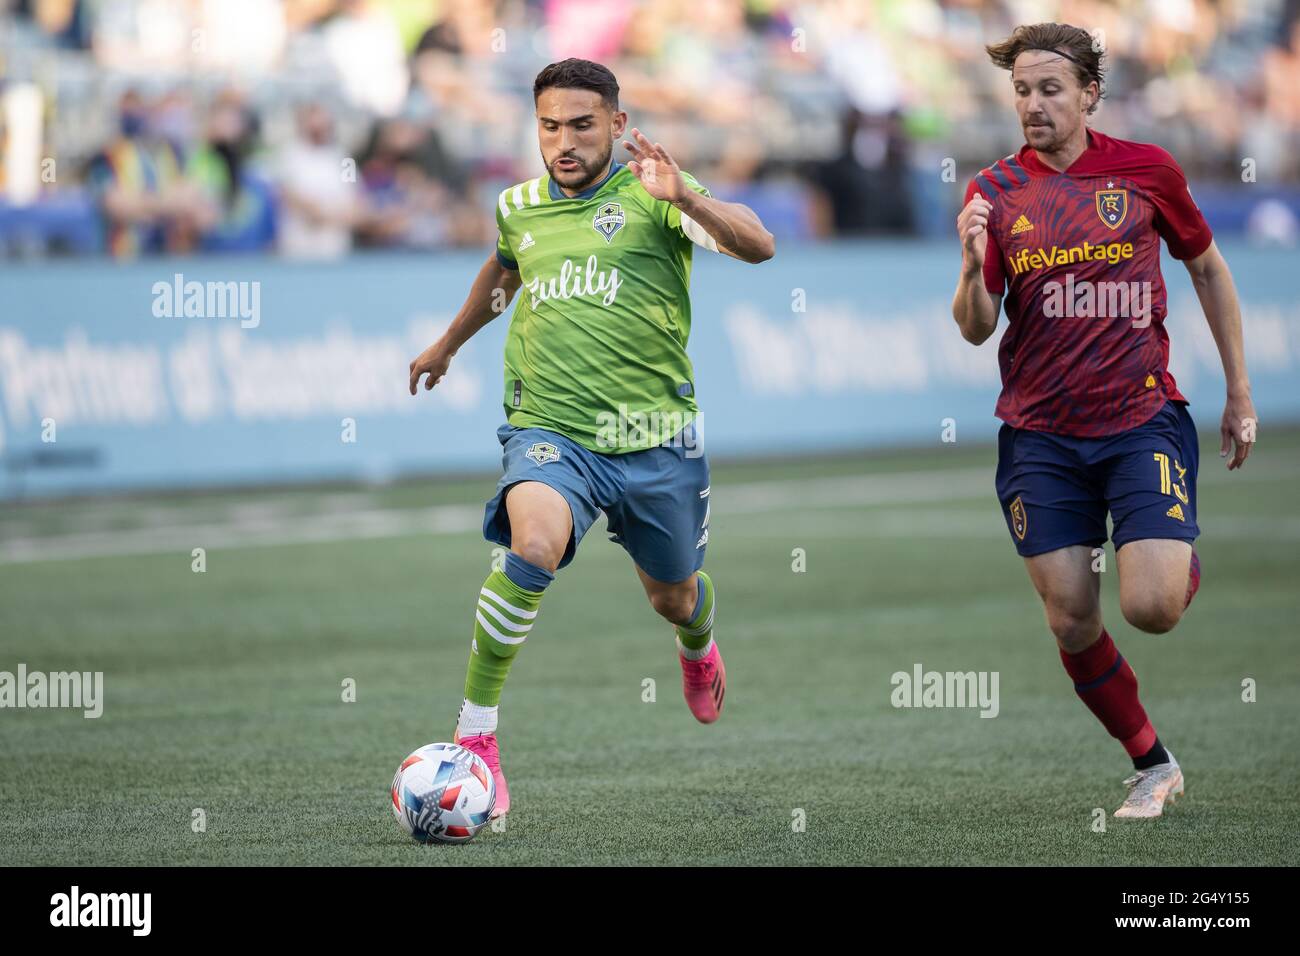 Seattle Sounders midfielder Cristian Roldan (7) running with the ball past Real Salt Lake midfielder Nick Besler (13) during the first half of an MLS Stock Photo